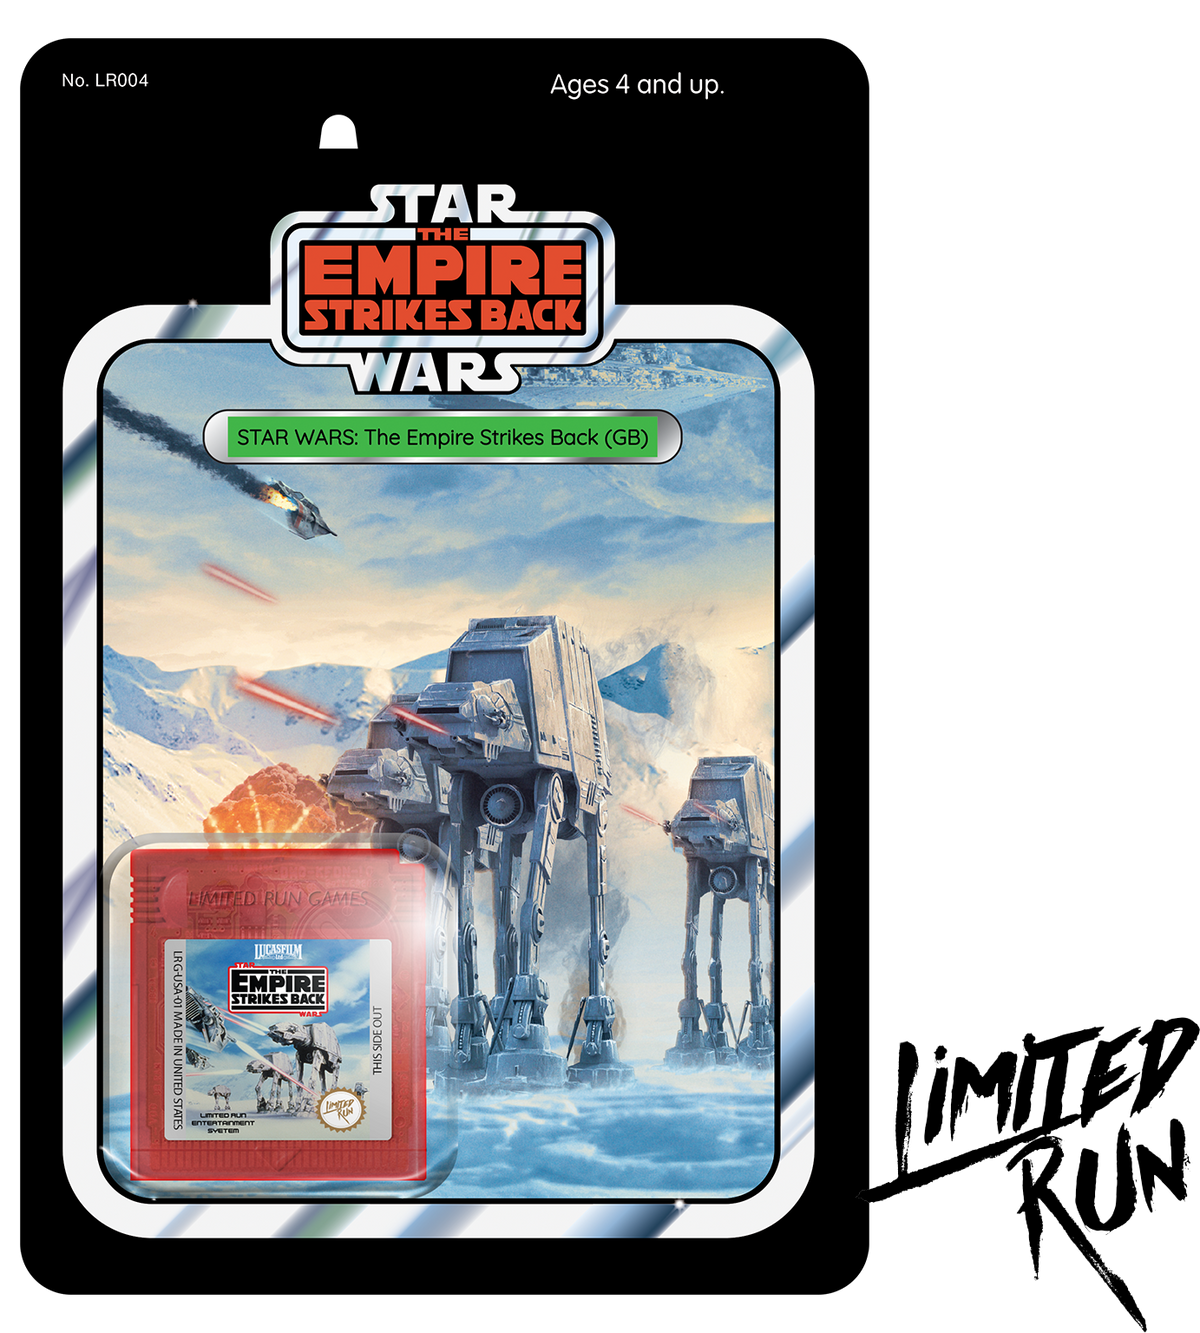 Star Wars: The Empire Strikes Back (GB) Classic Edition